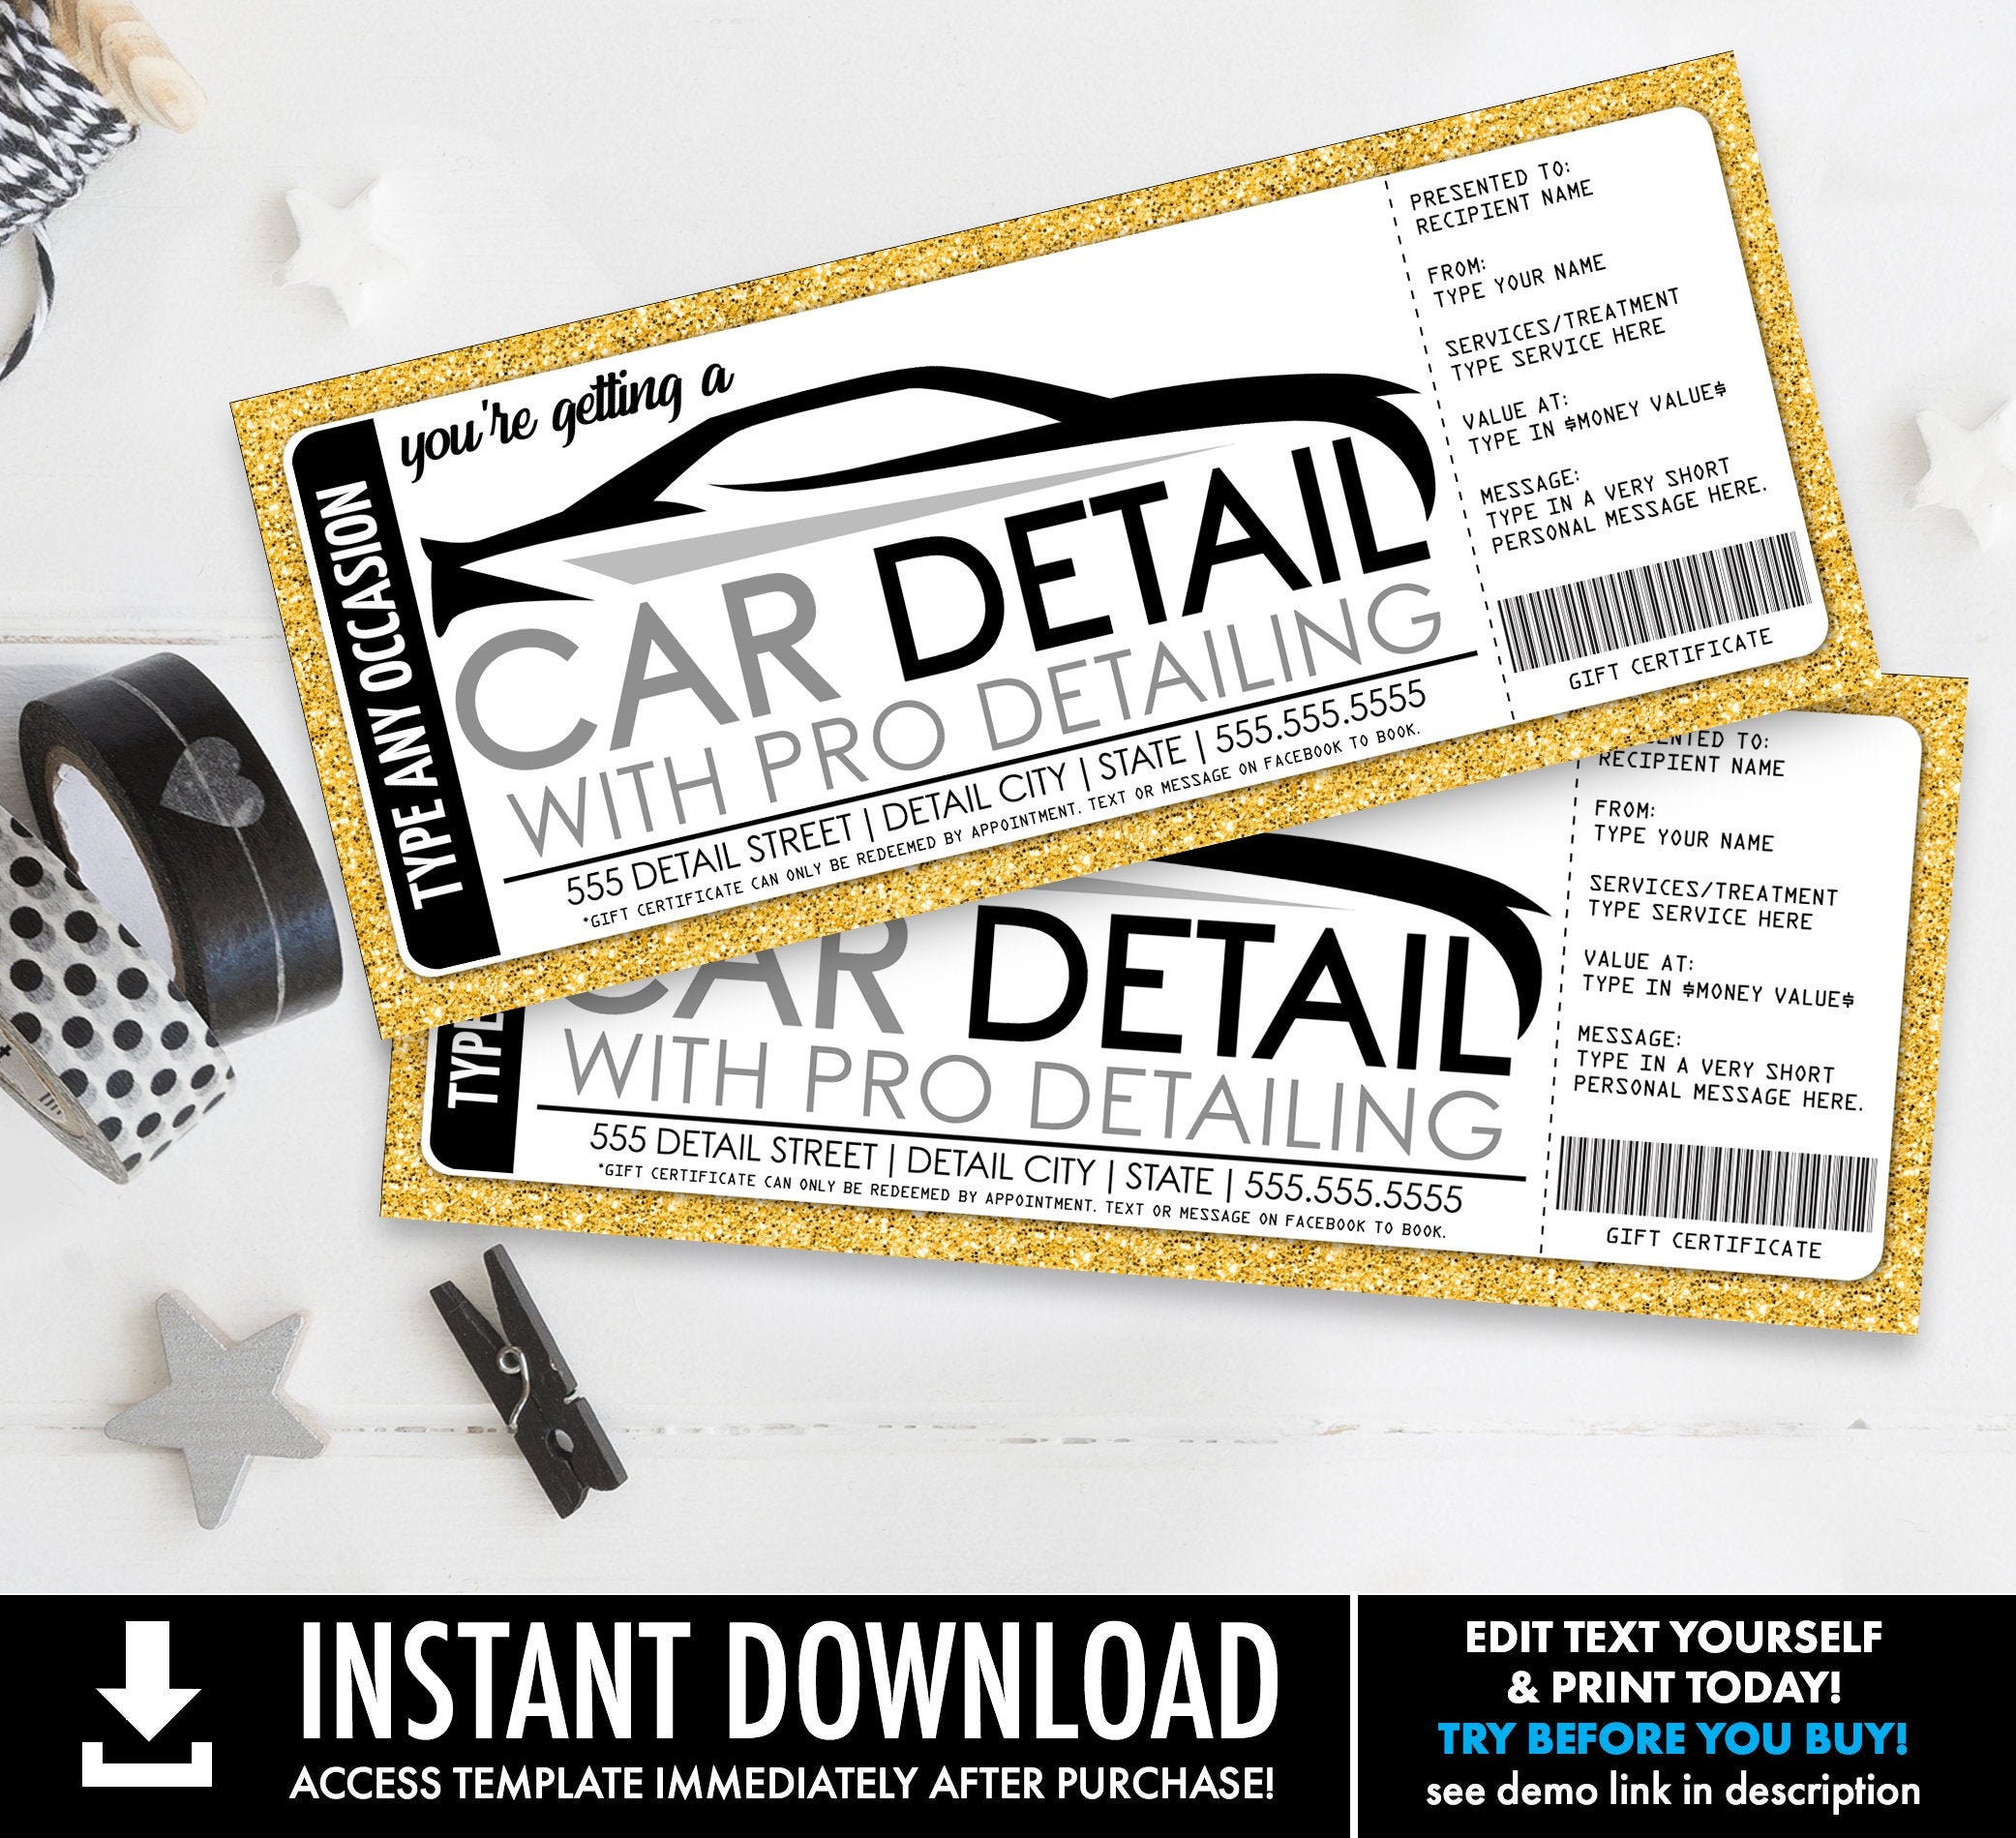 Car Detailing Gift Certificate EDITABLE, Auto Detailing Certificate  Printable, Car Detail Voucher, Car Coupon, Car Lover Gift, Any Occasion  (Instant Download) -…